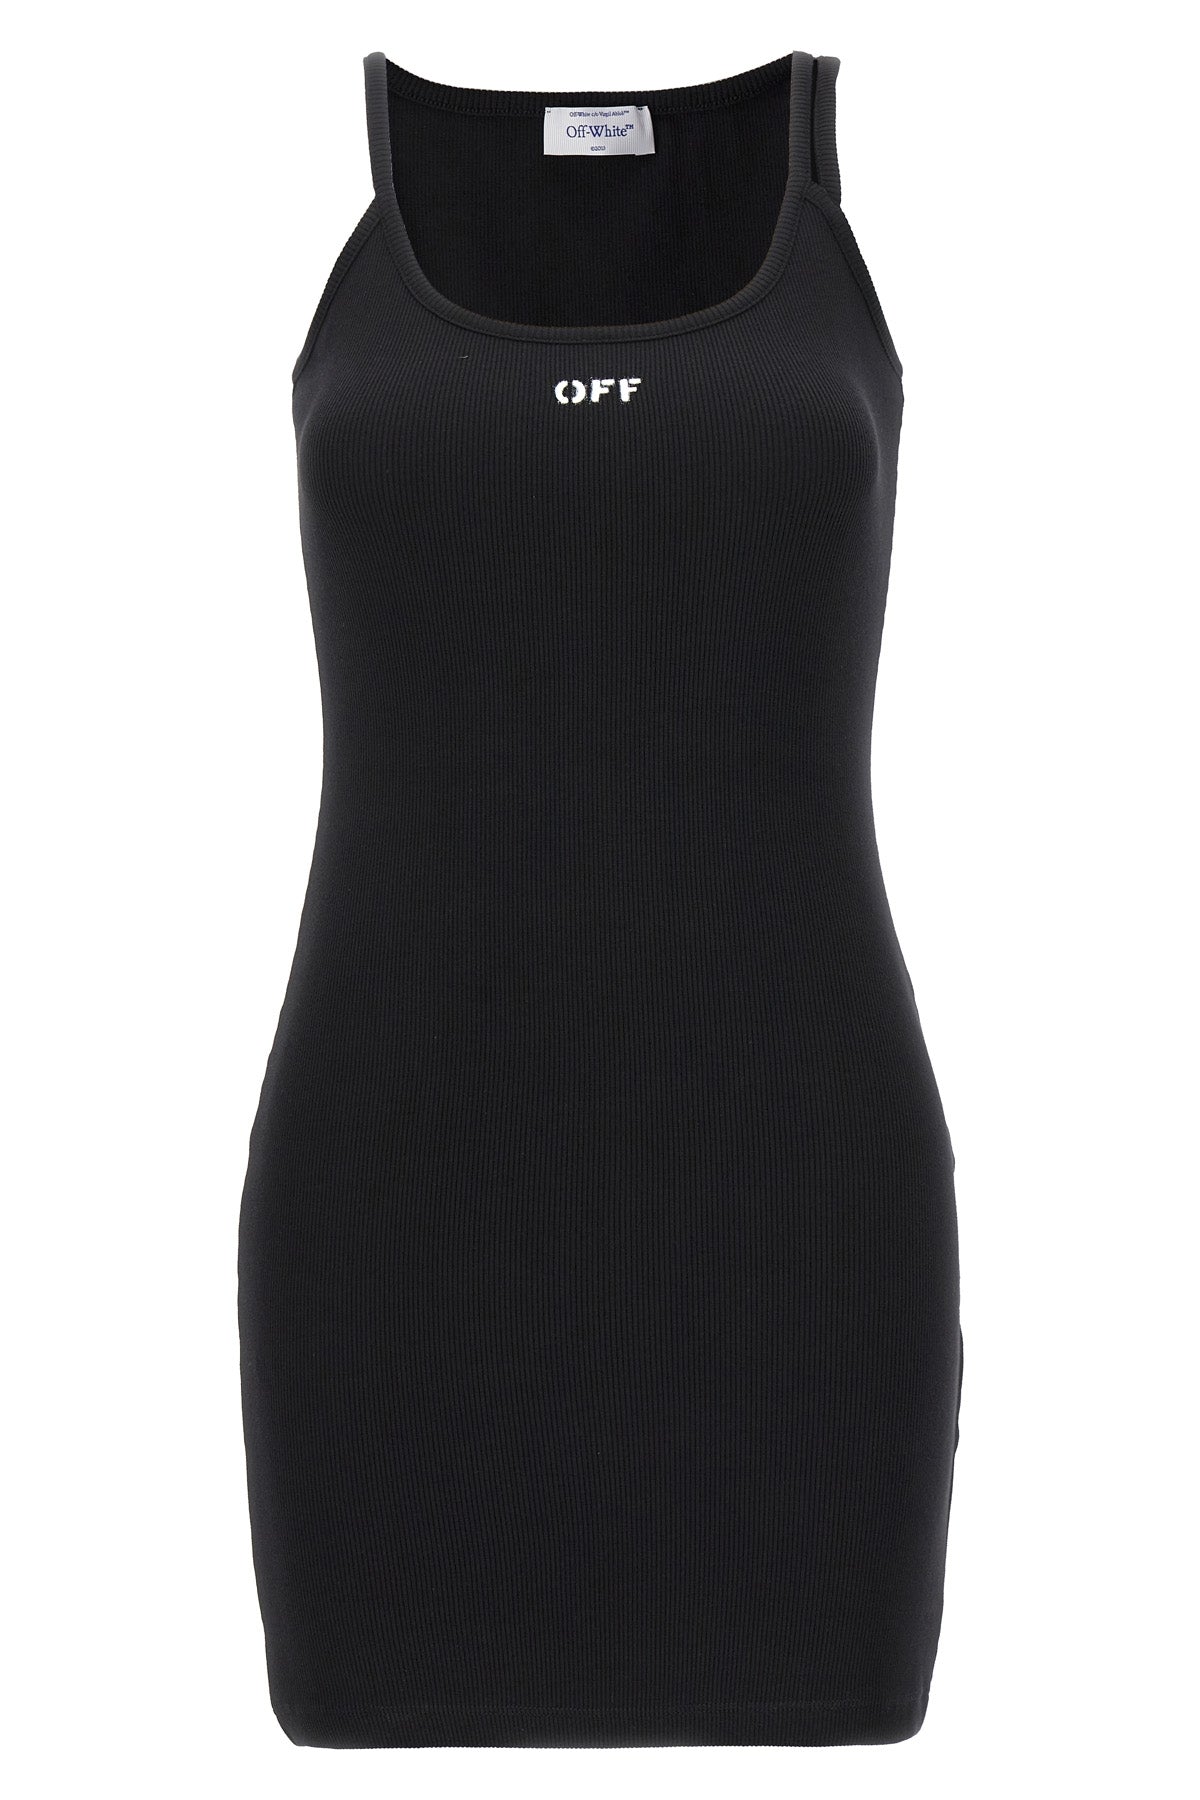 OFF-WHITE 'OFF' DRESS